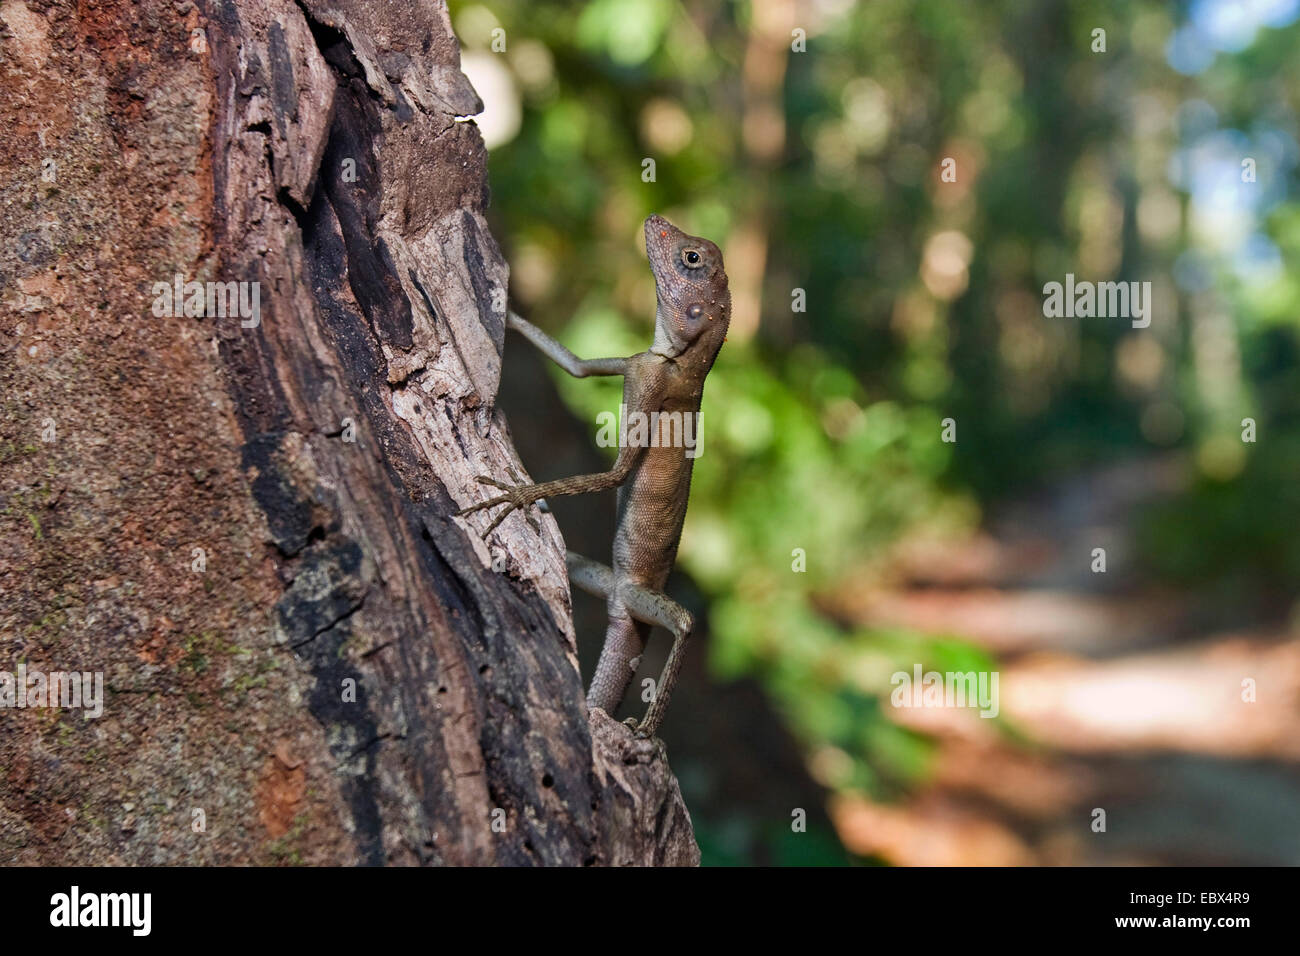 Agama (Gonocephalus spec.), young Agama at a tree trunk, India, Andaman Islands Stock Photo